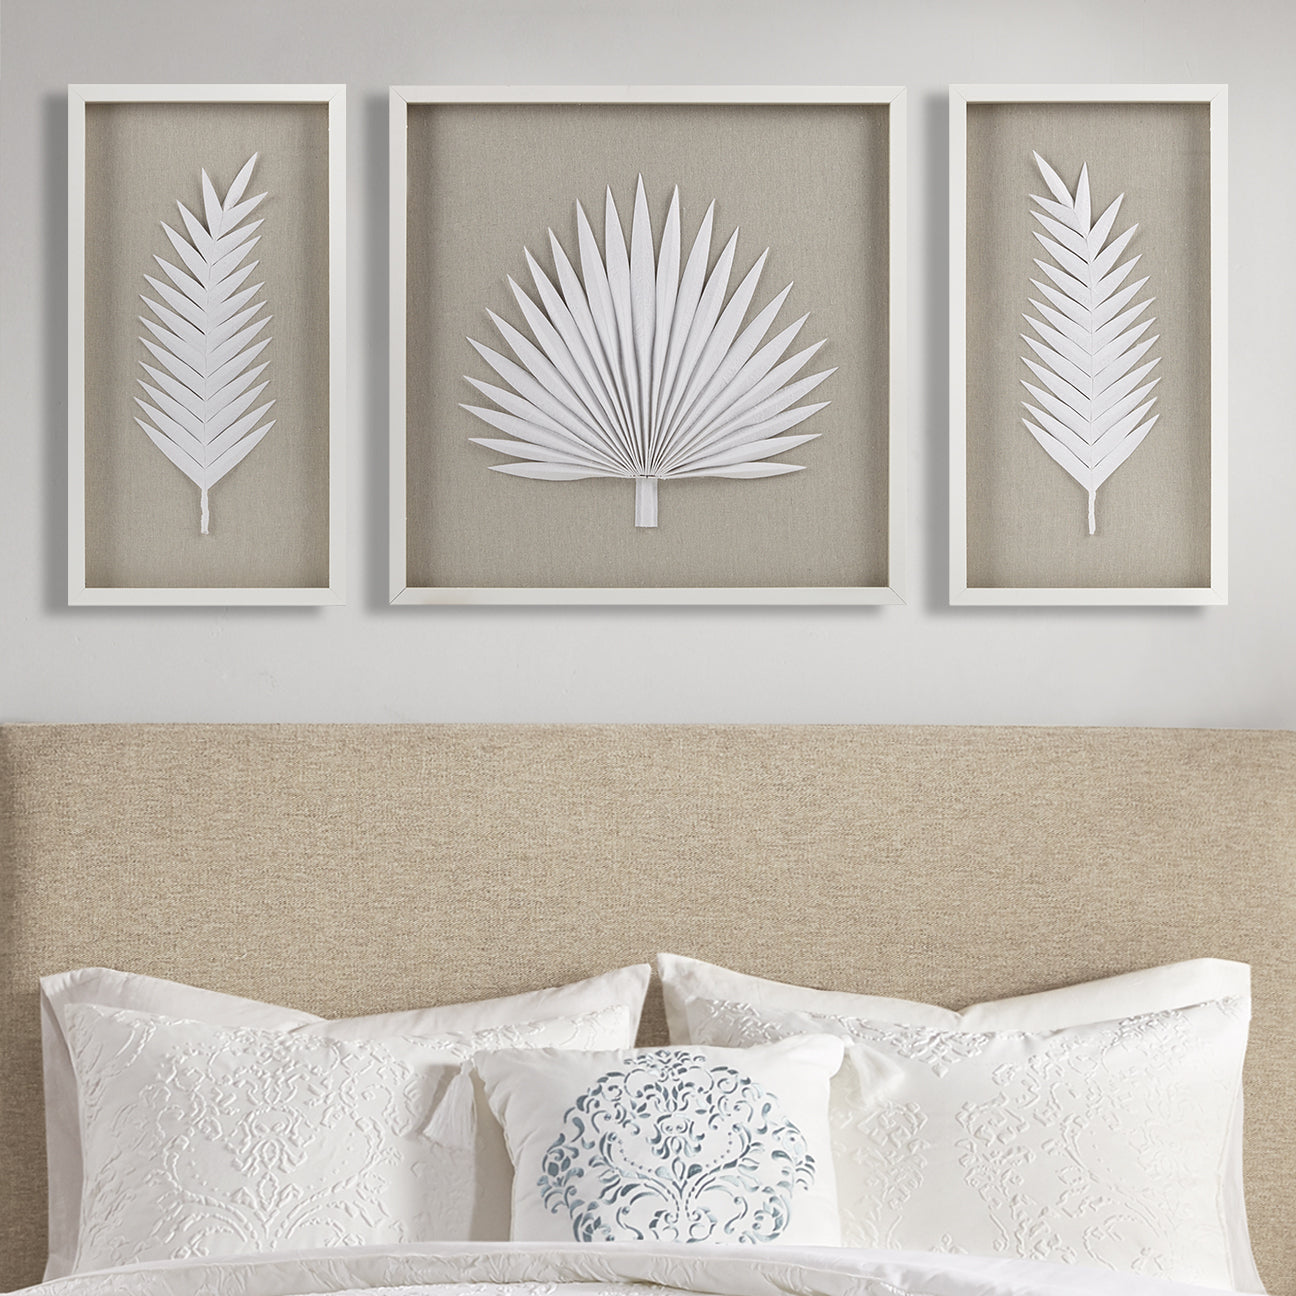 Sabal Framed Rice Paper Palm Leaves 3-piece Shadowbox Wall Decor Set - Natural & White